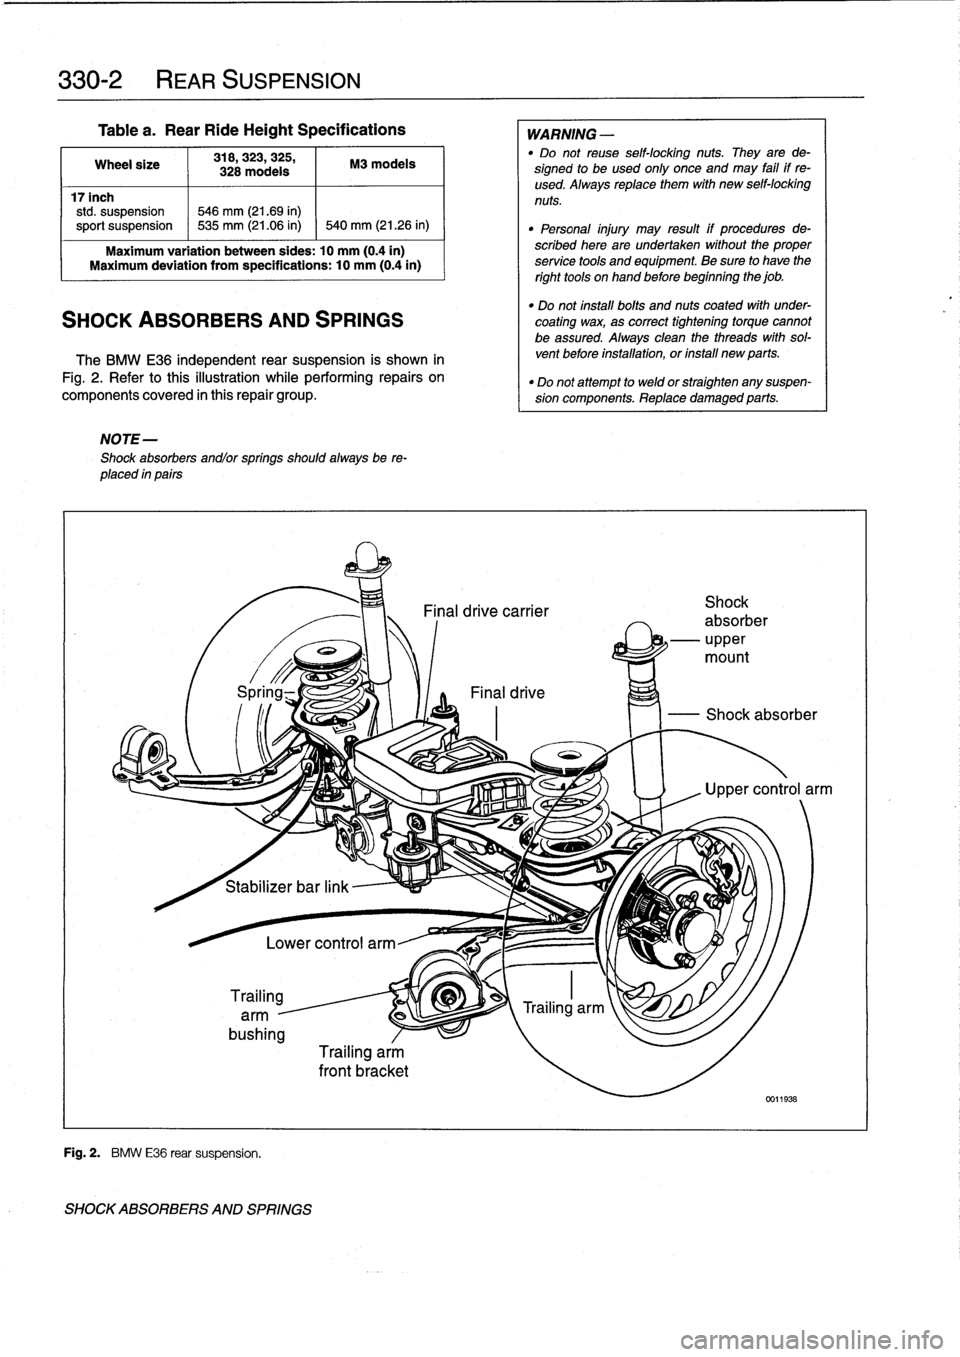 BMW 318i 1995 E36 Owners Guide 
330-2

	

REAR
SUSPENSION

Table
a
.
Rear
RideHeight
Specifications

Wheel
size

	

318,323,
325,

	

M3
modeis
328
modeis

17inch
std
.
suspension

	

546
mm
(21.69
in)
sport
suspension

	

~
535
mm